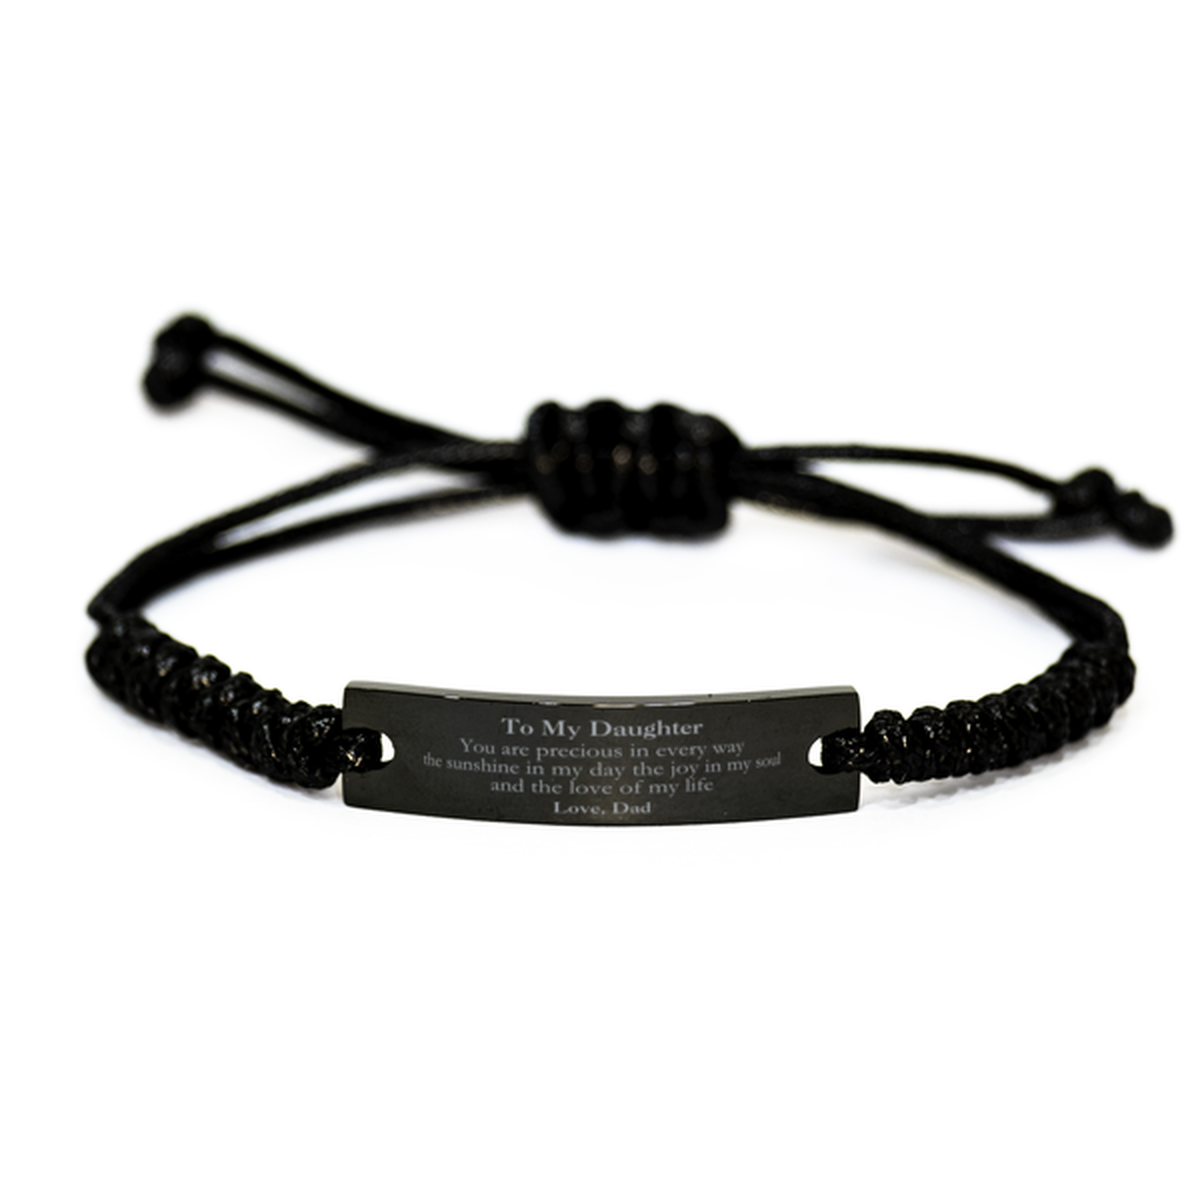 Graduation Gifts for Daughter Black Rope Bracelet Present from Dad, Christmas Daughter Birthday Gifts Daughter You are precious in every way the sunshine in my day. Love, Dad